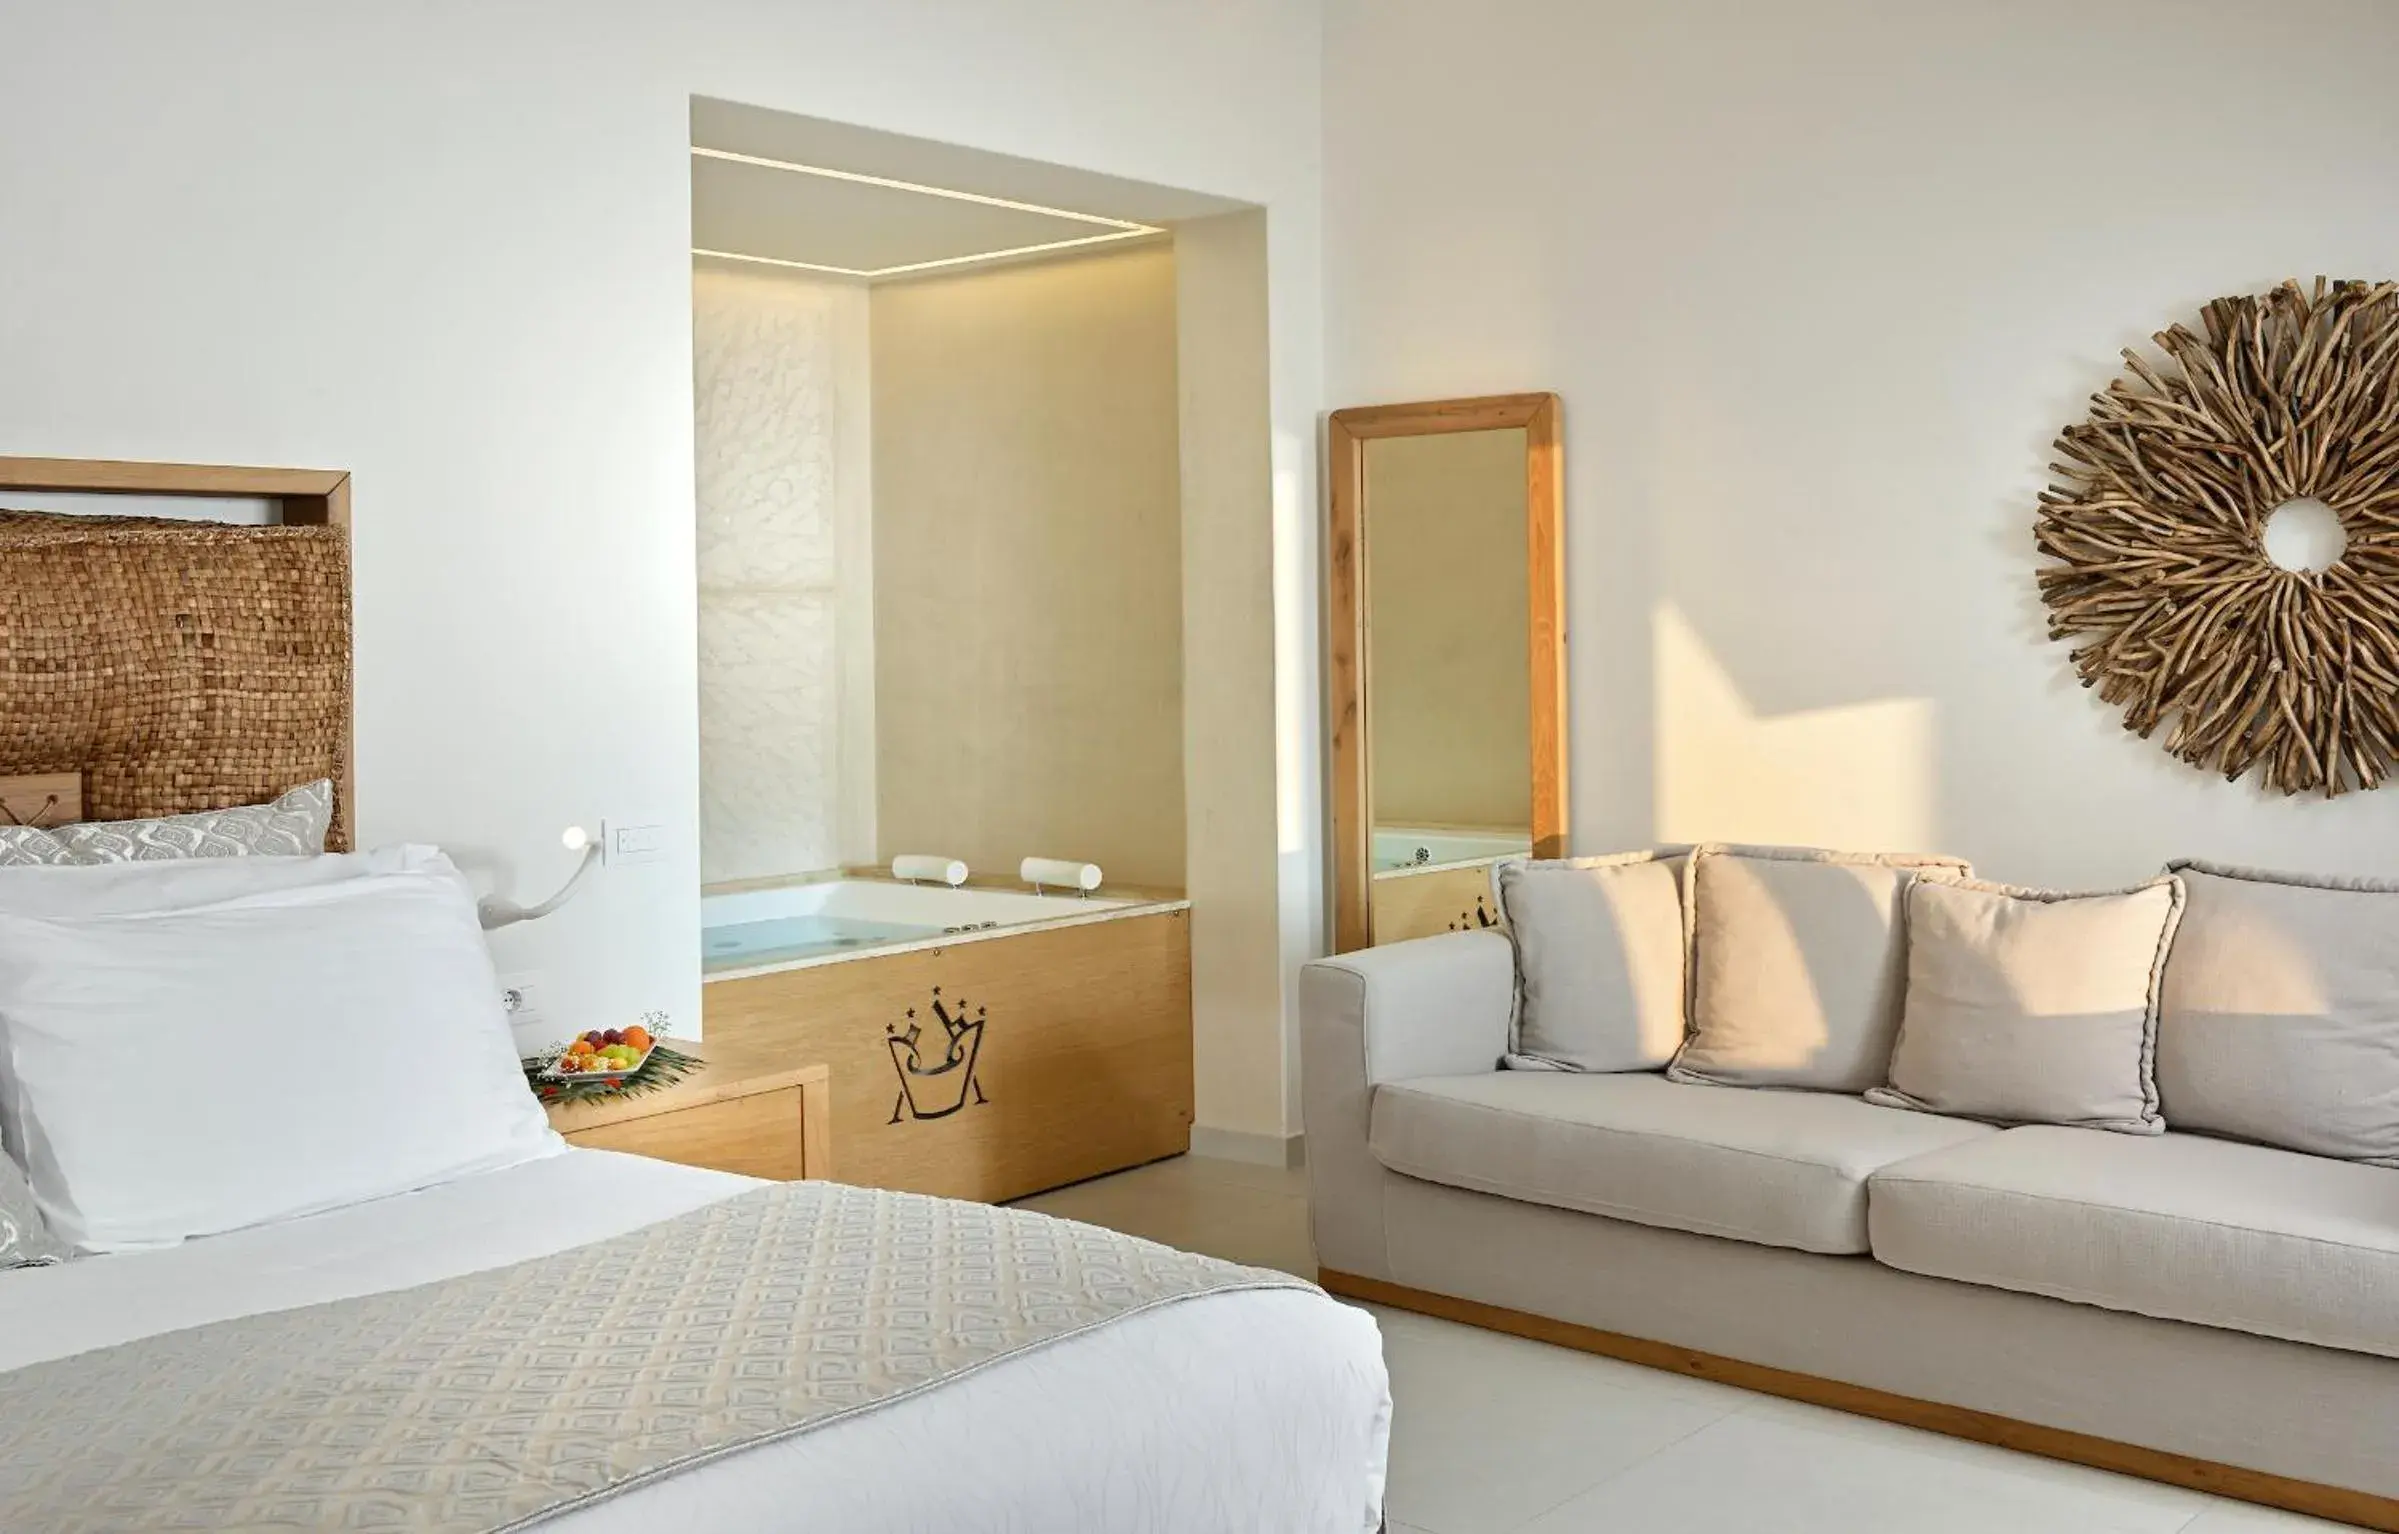 Bedroom in Anax Resort and Spa